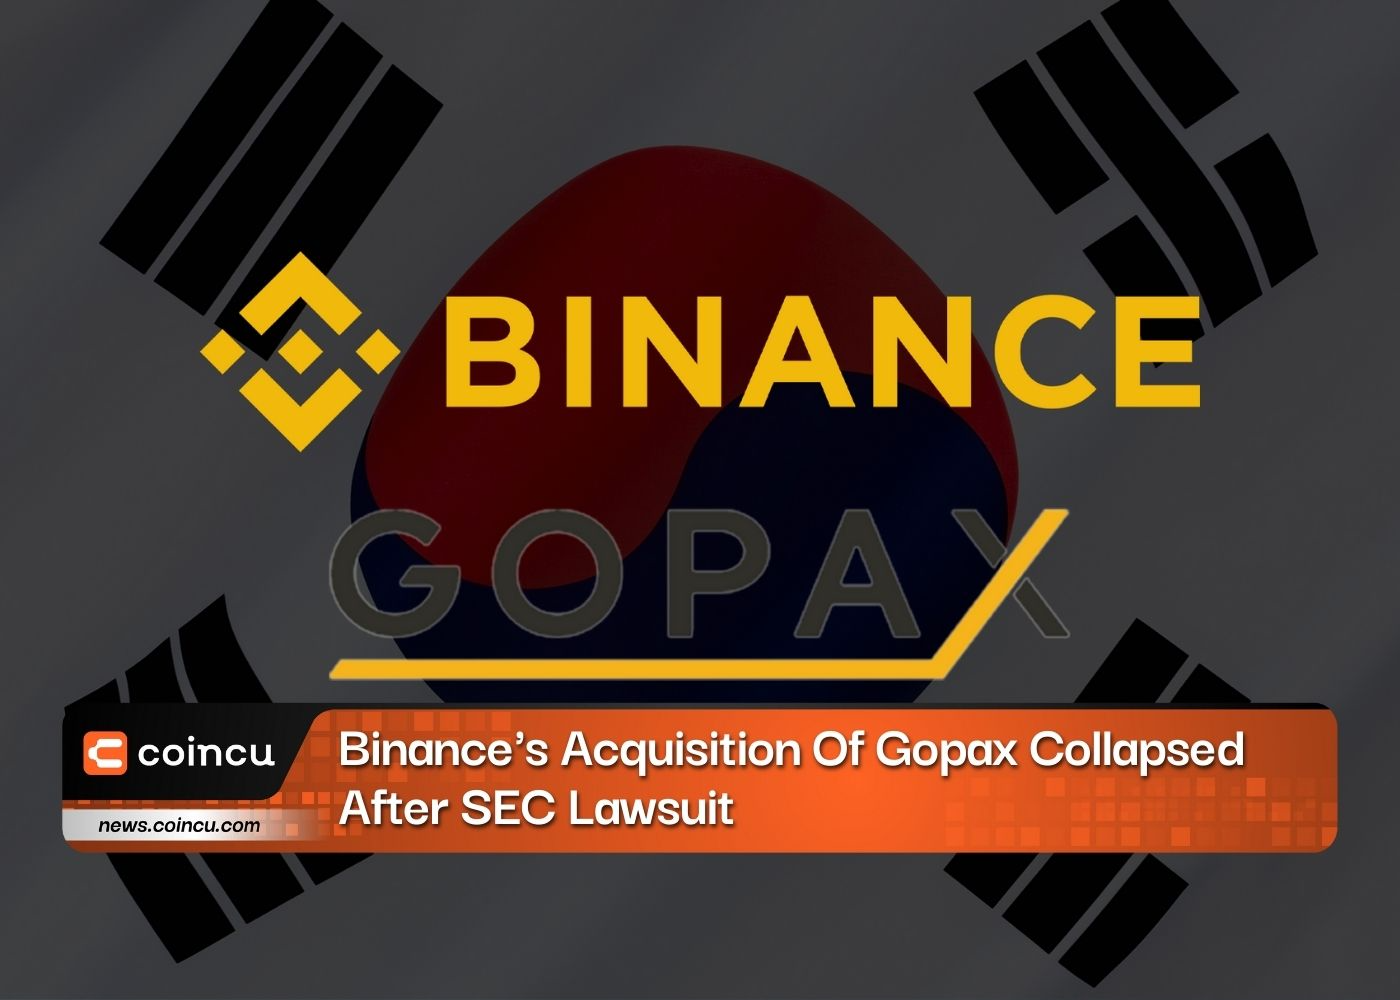 Binance's Acquisition Of Gopax Collapsed After SEC Lawsuit